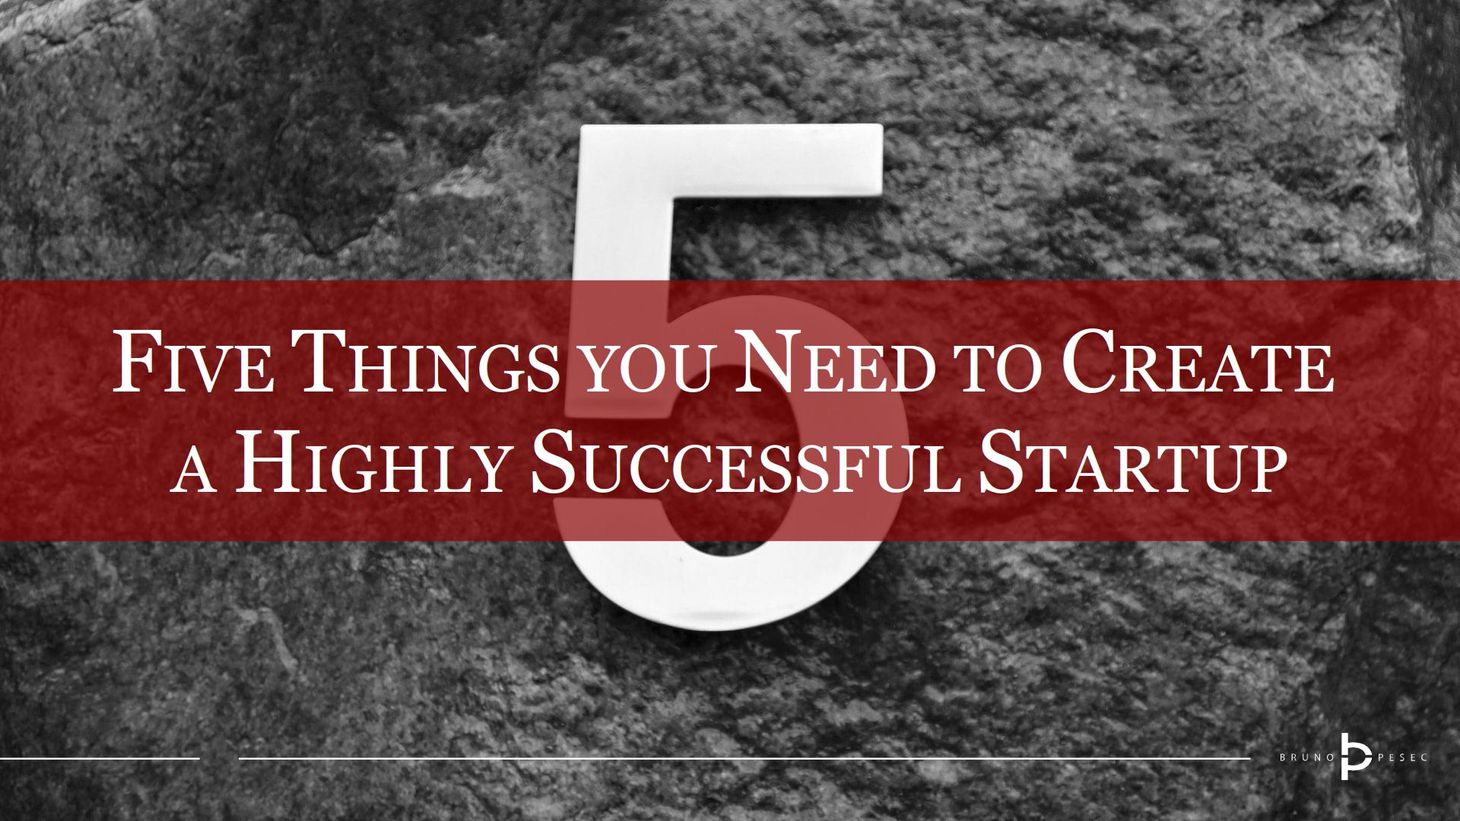 Five Things You Need To Create A Highly Successful Startup